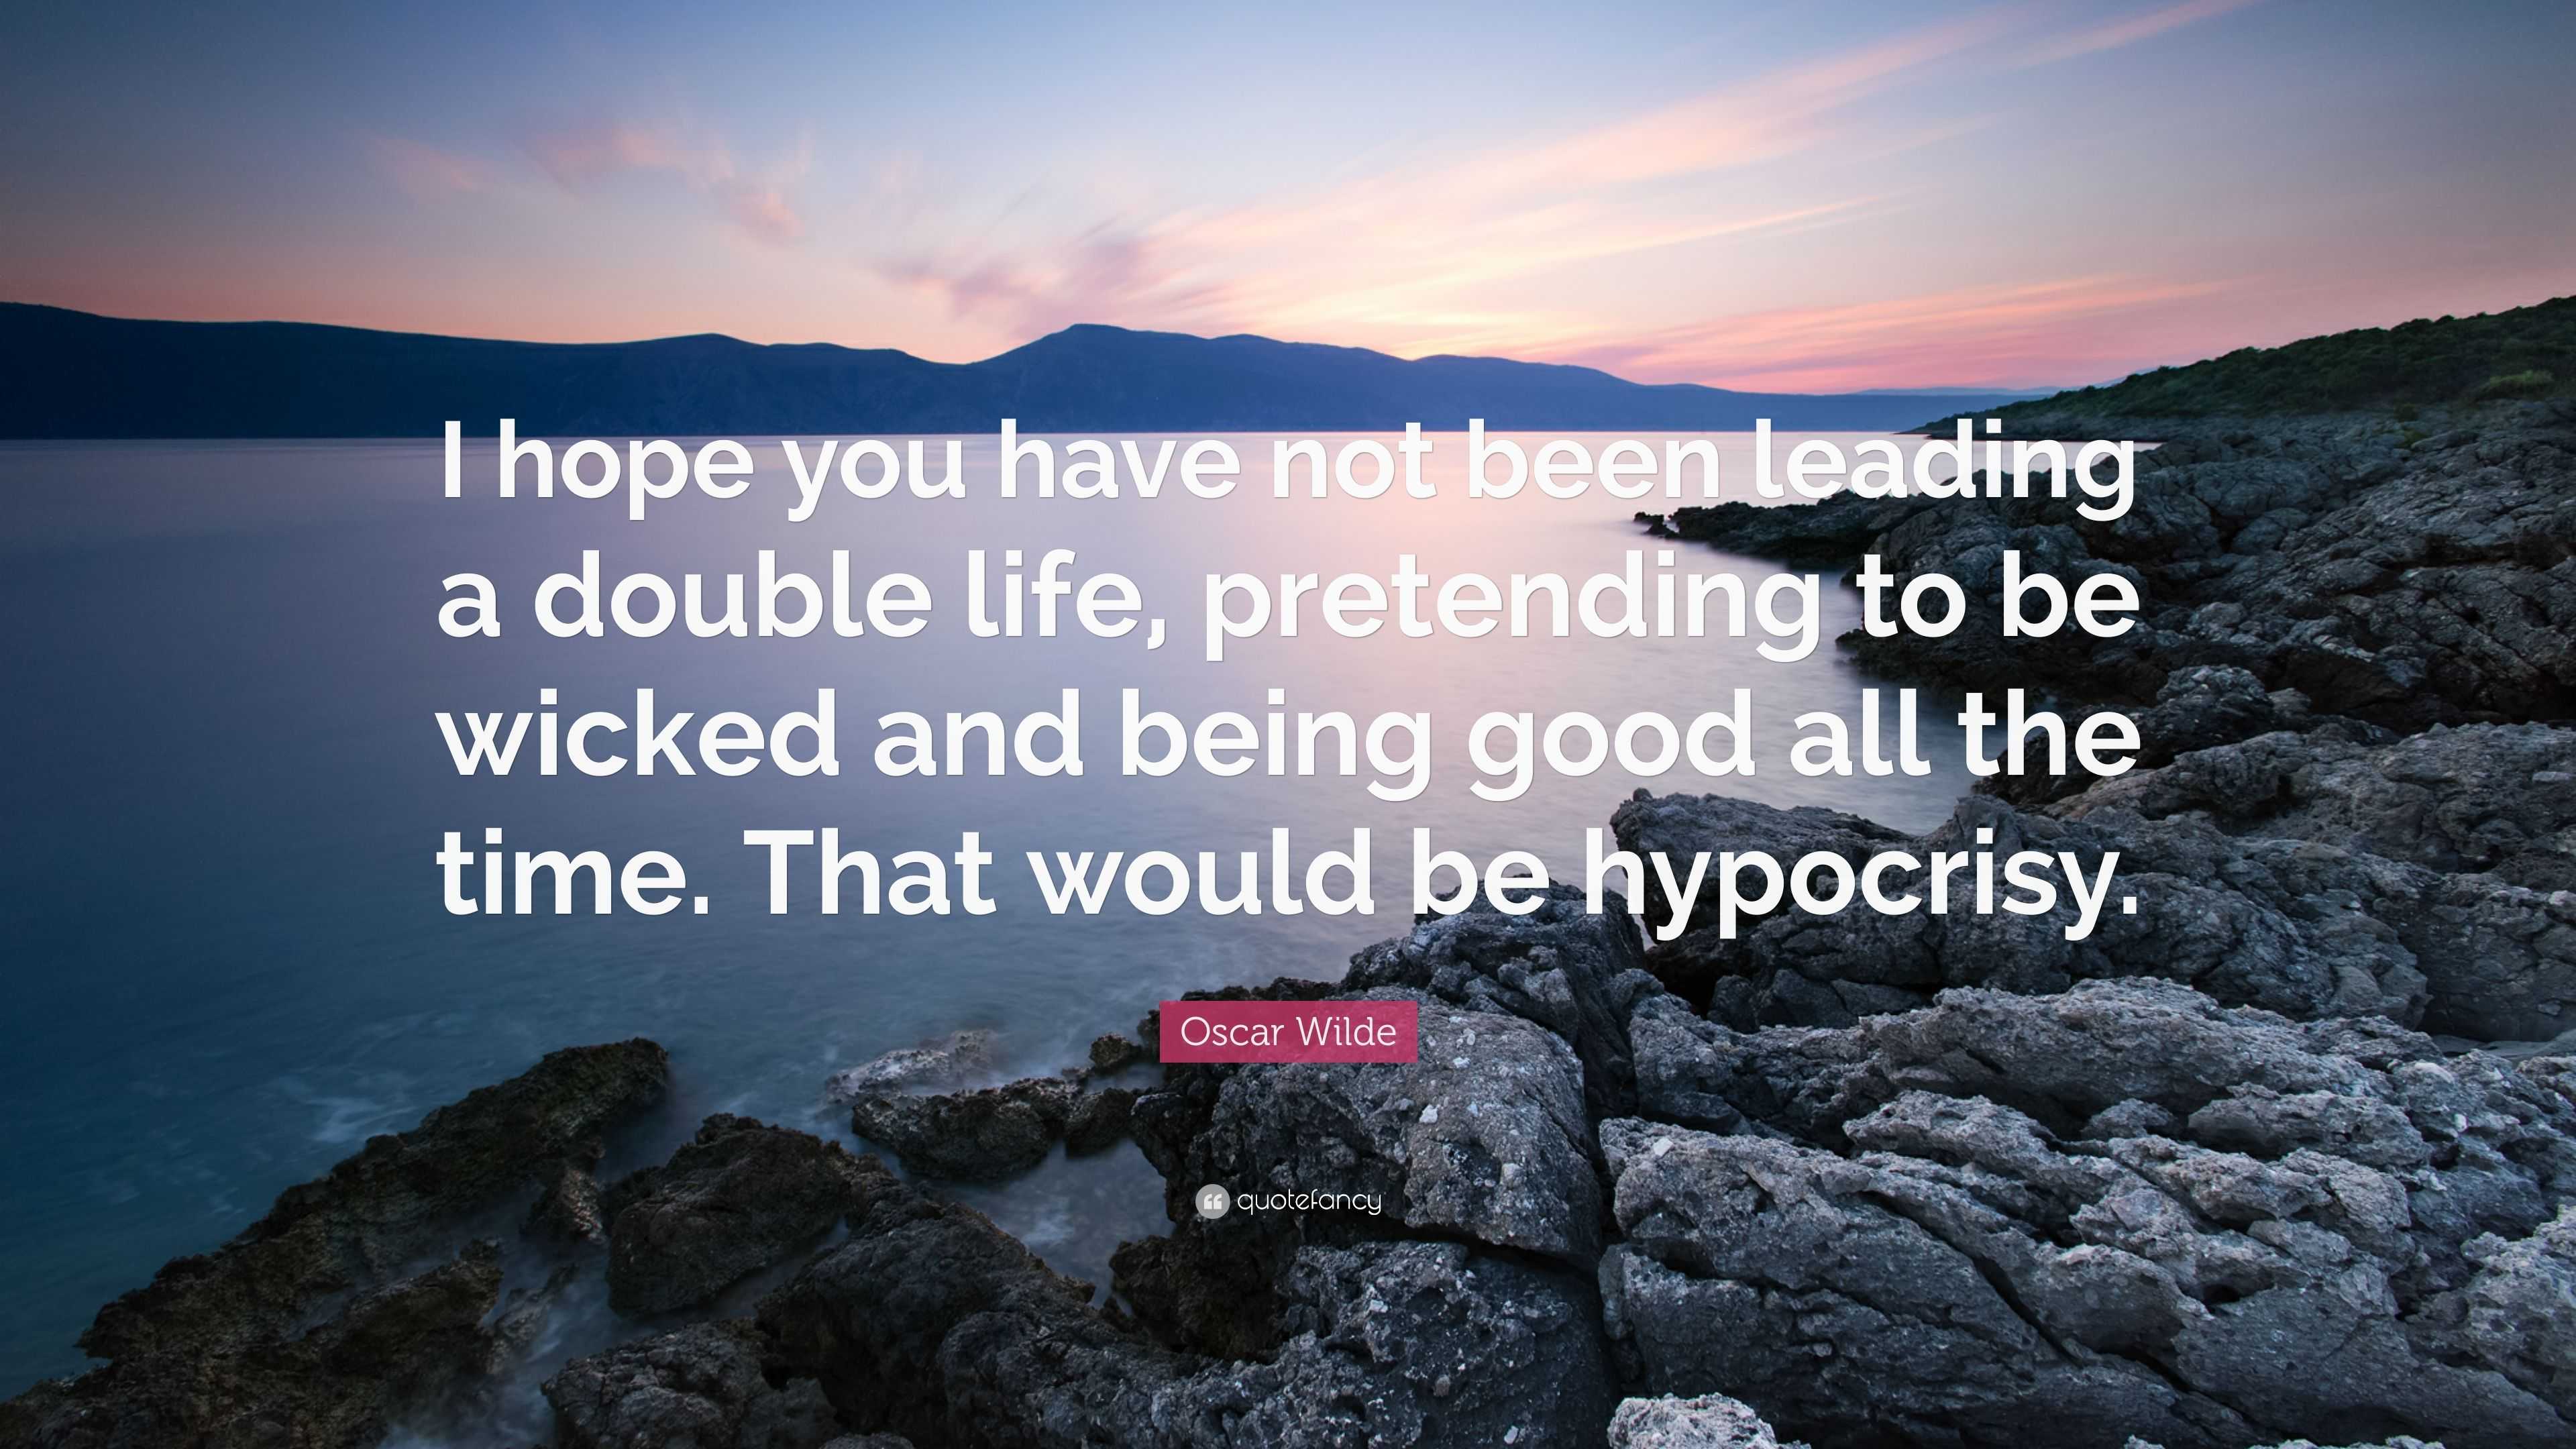 Oscar Wilde Quote: "I hope you have not been leading a double life, pretending to be wicked and ...